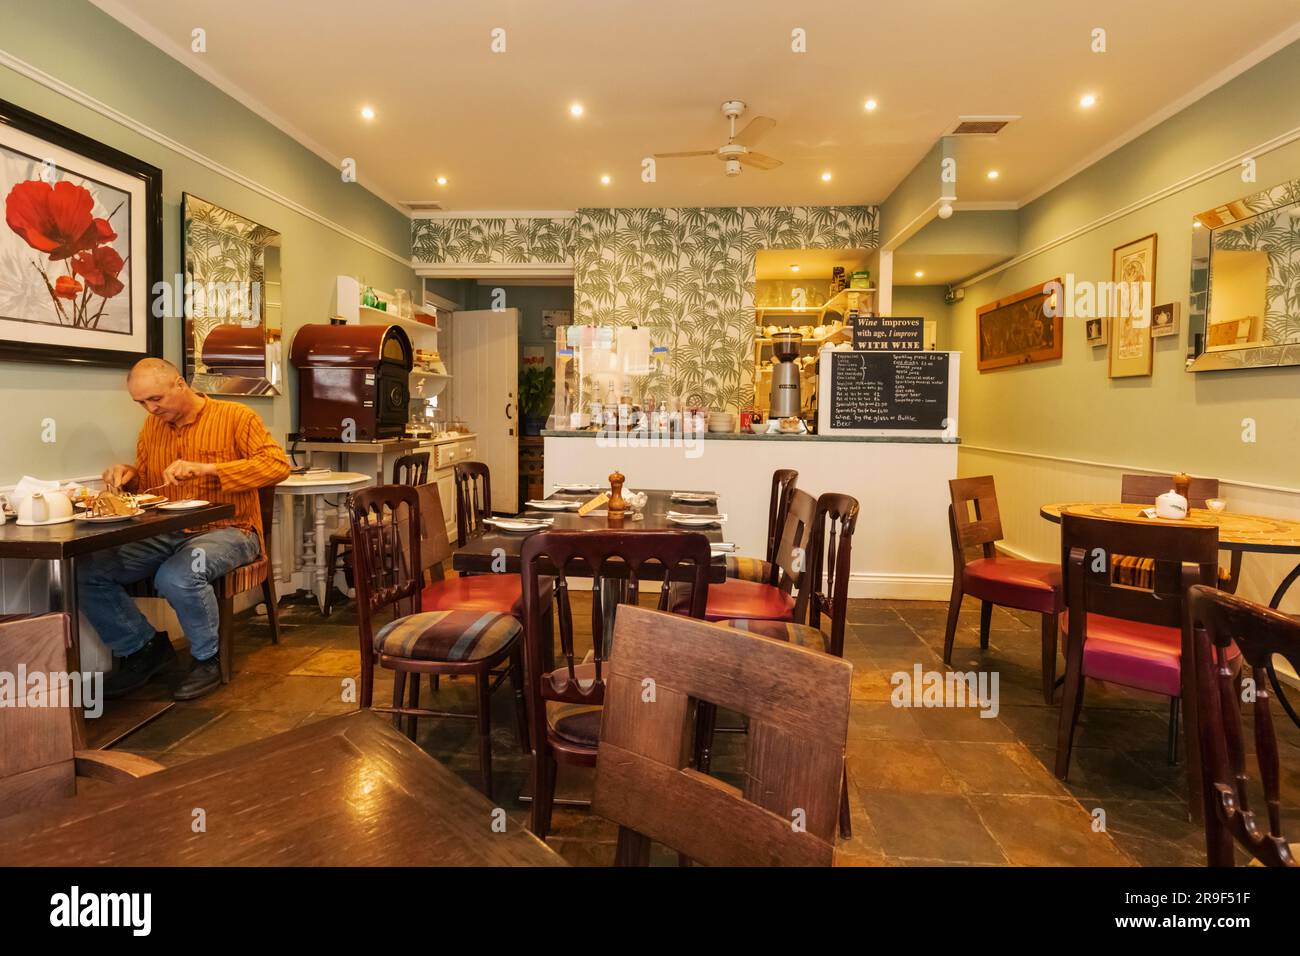 England, Sussex, East Sussex, Hastings, The Old Town, Interior View of Colourful Cafe Stock Photo